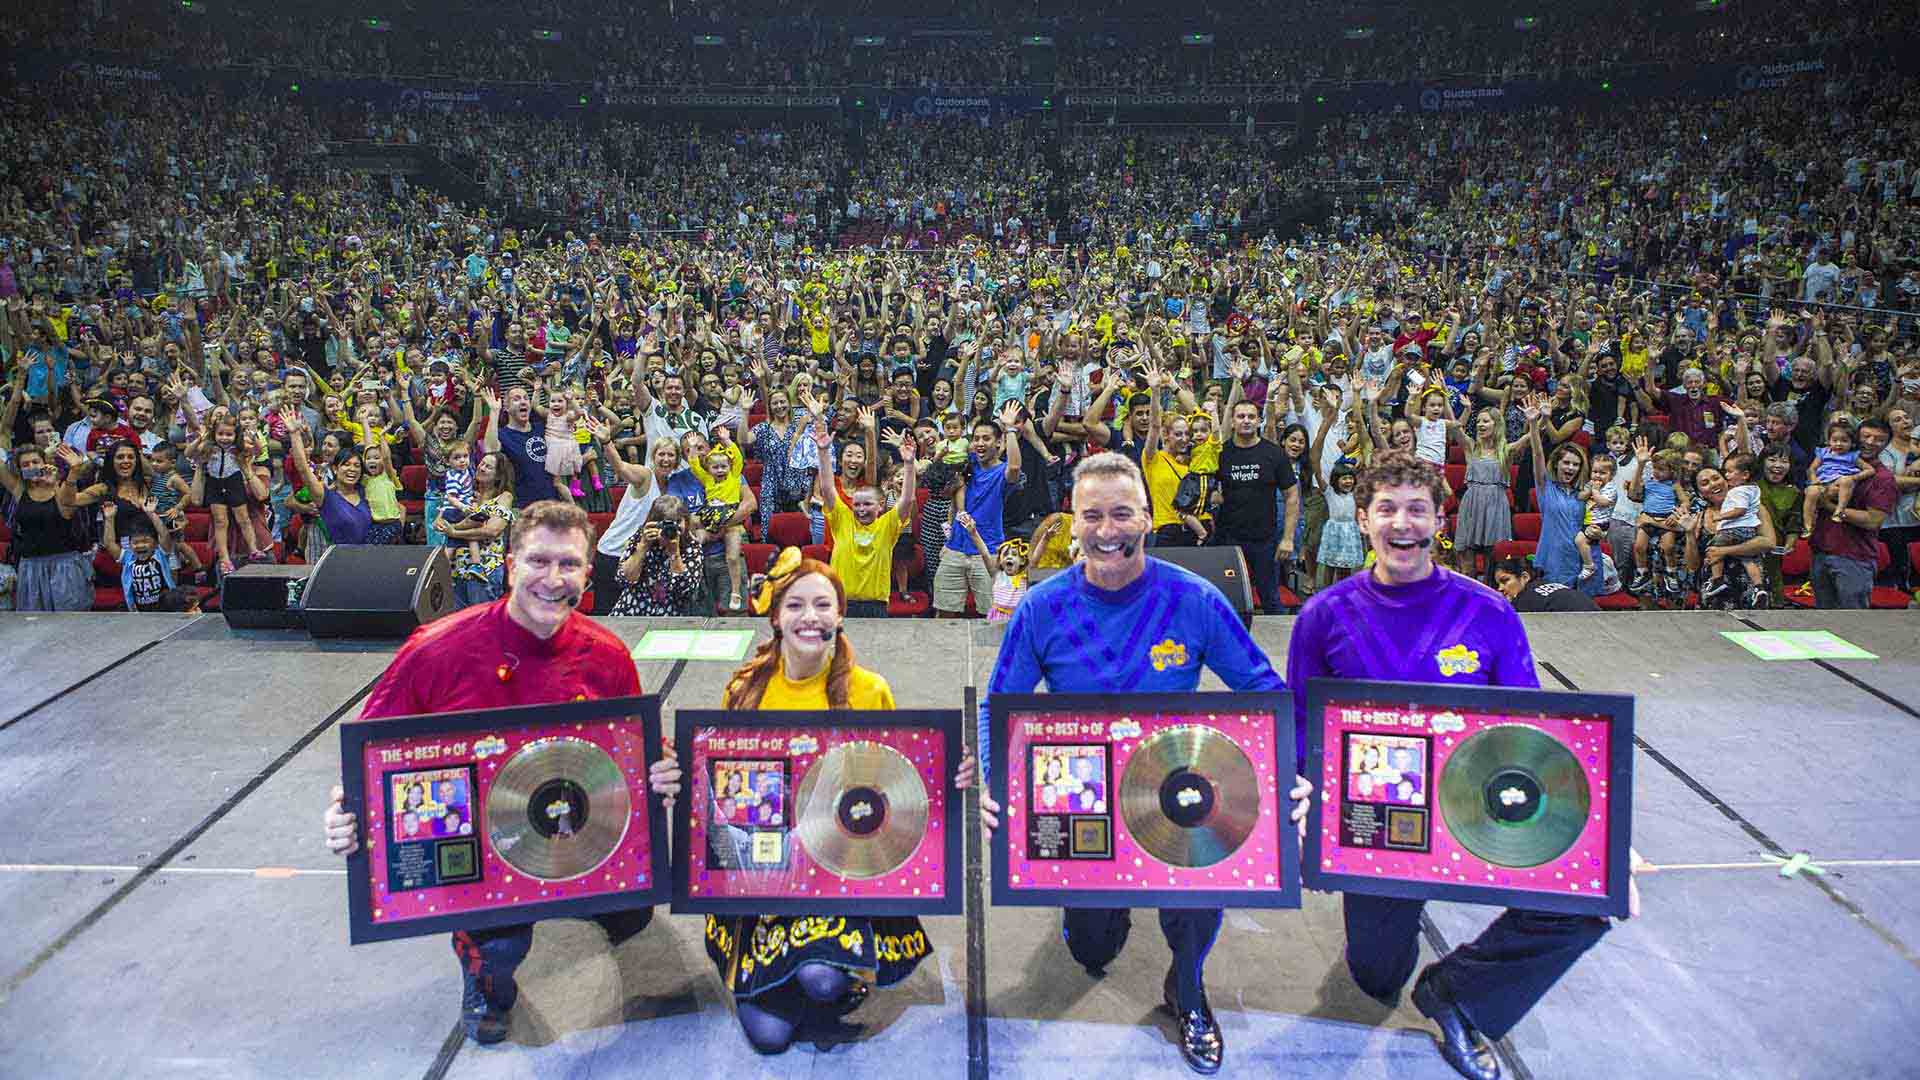 Nostalgia Alert: Prime Video's Documentary About The Wiggles Will Hit Your Streaming Queue in October